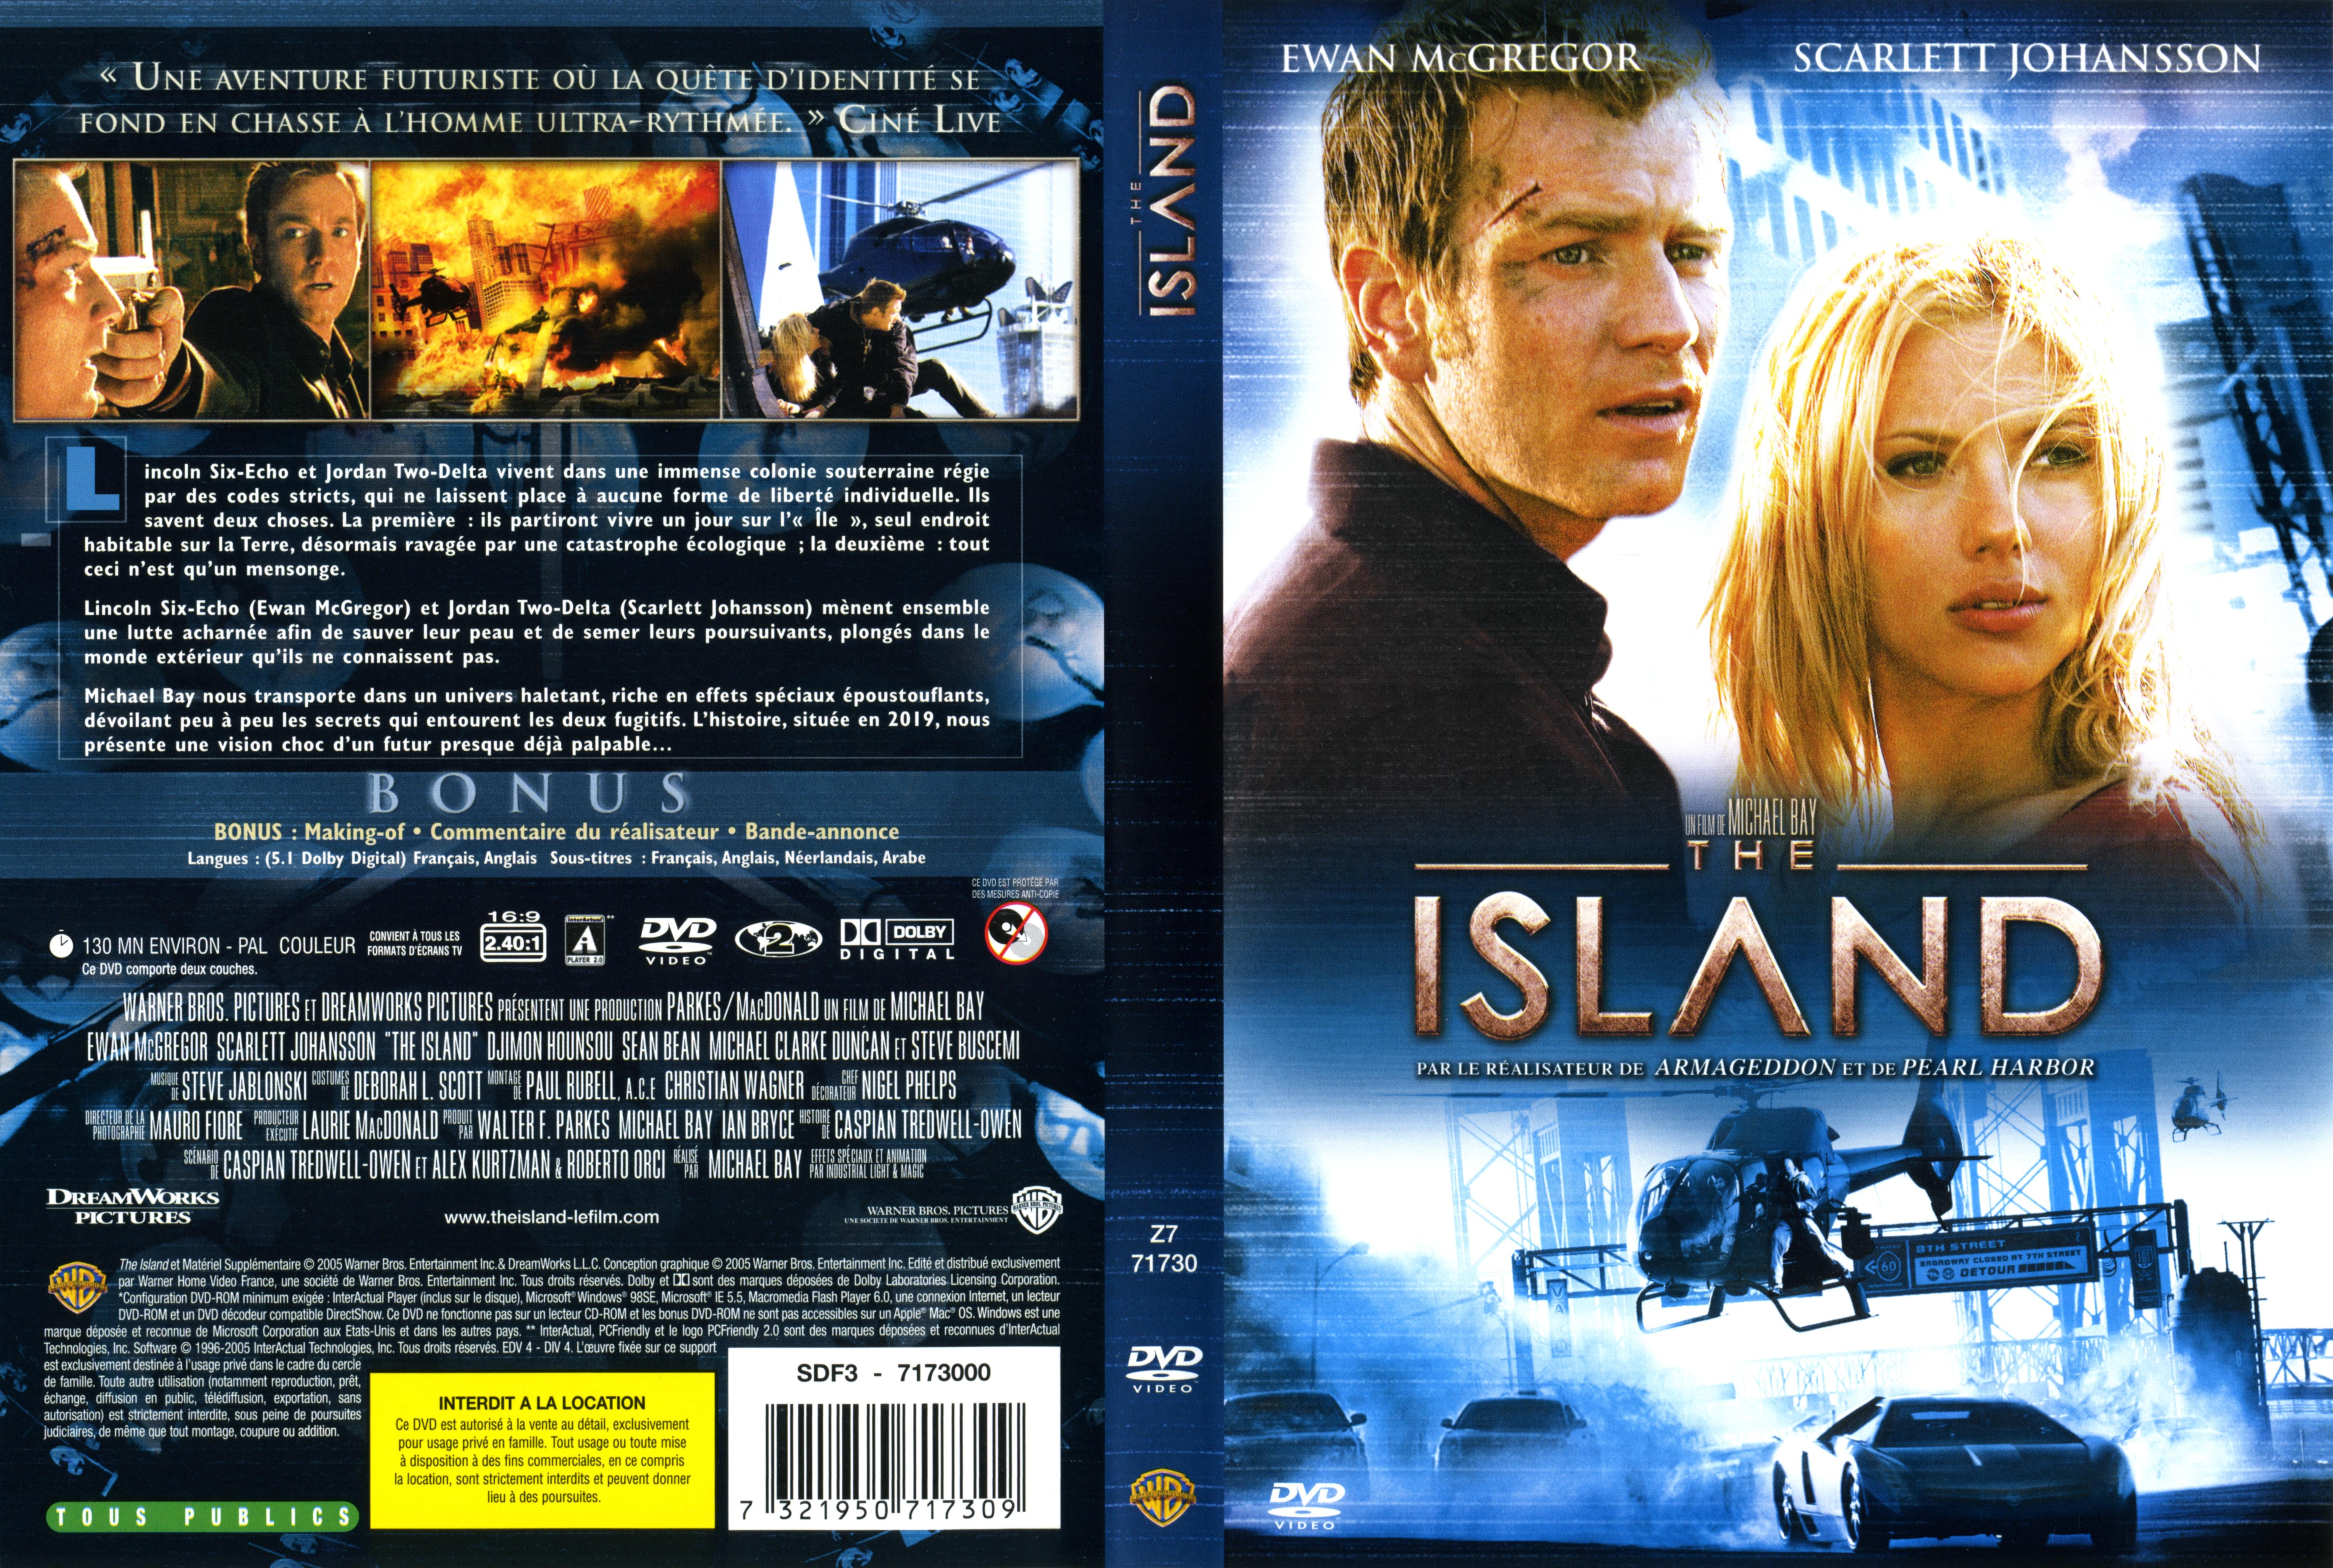 Jaquette DVD The island